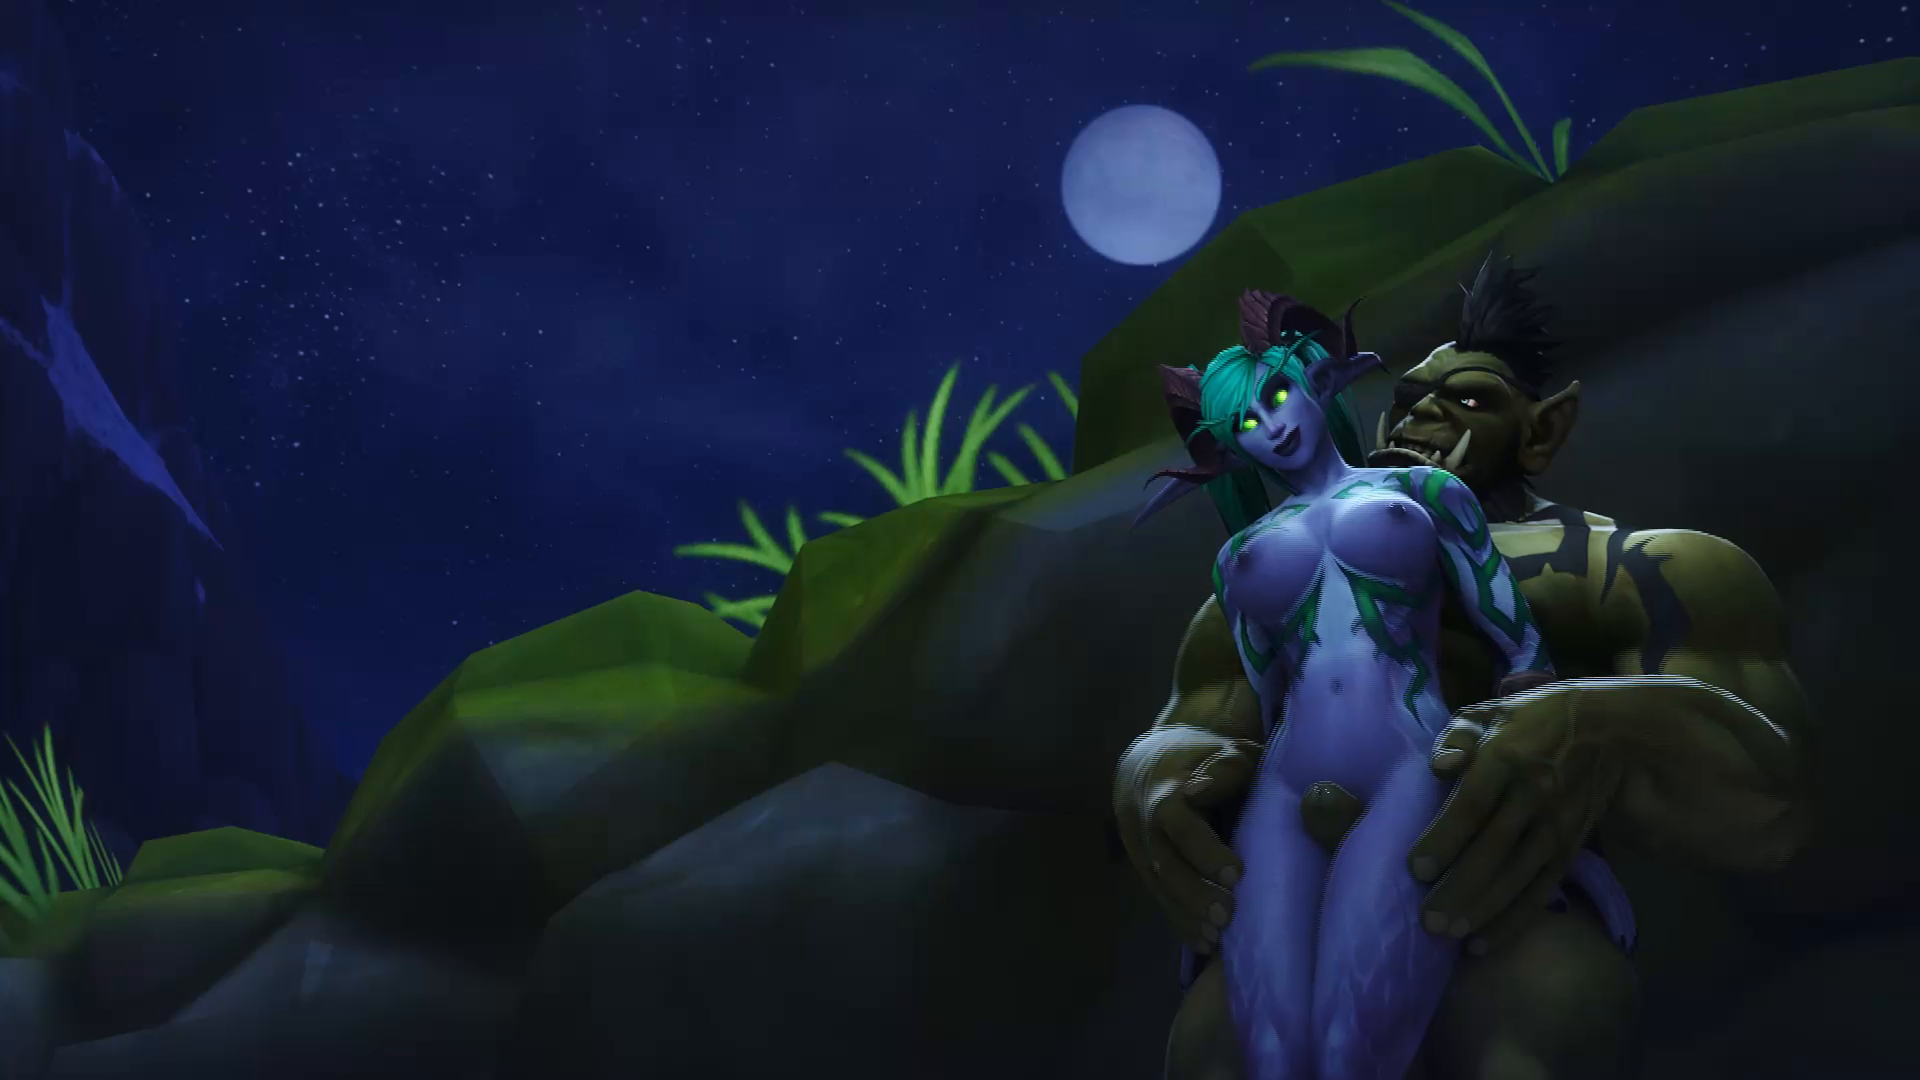 Video by smutworks with the username @smutworks,  August 14, 2020 at 3:30 AM. The post is about the topic 3D Animation Gaming and the text says 'Hisako saw an orc hunter running around lost in Stormsong Valley one night, and decided to help him find his way...

Grokale belongs to @rexxworld
 
#3D #Warcraft #Orc #NightElf #Thighjob #Teasing'